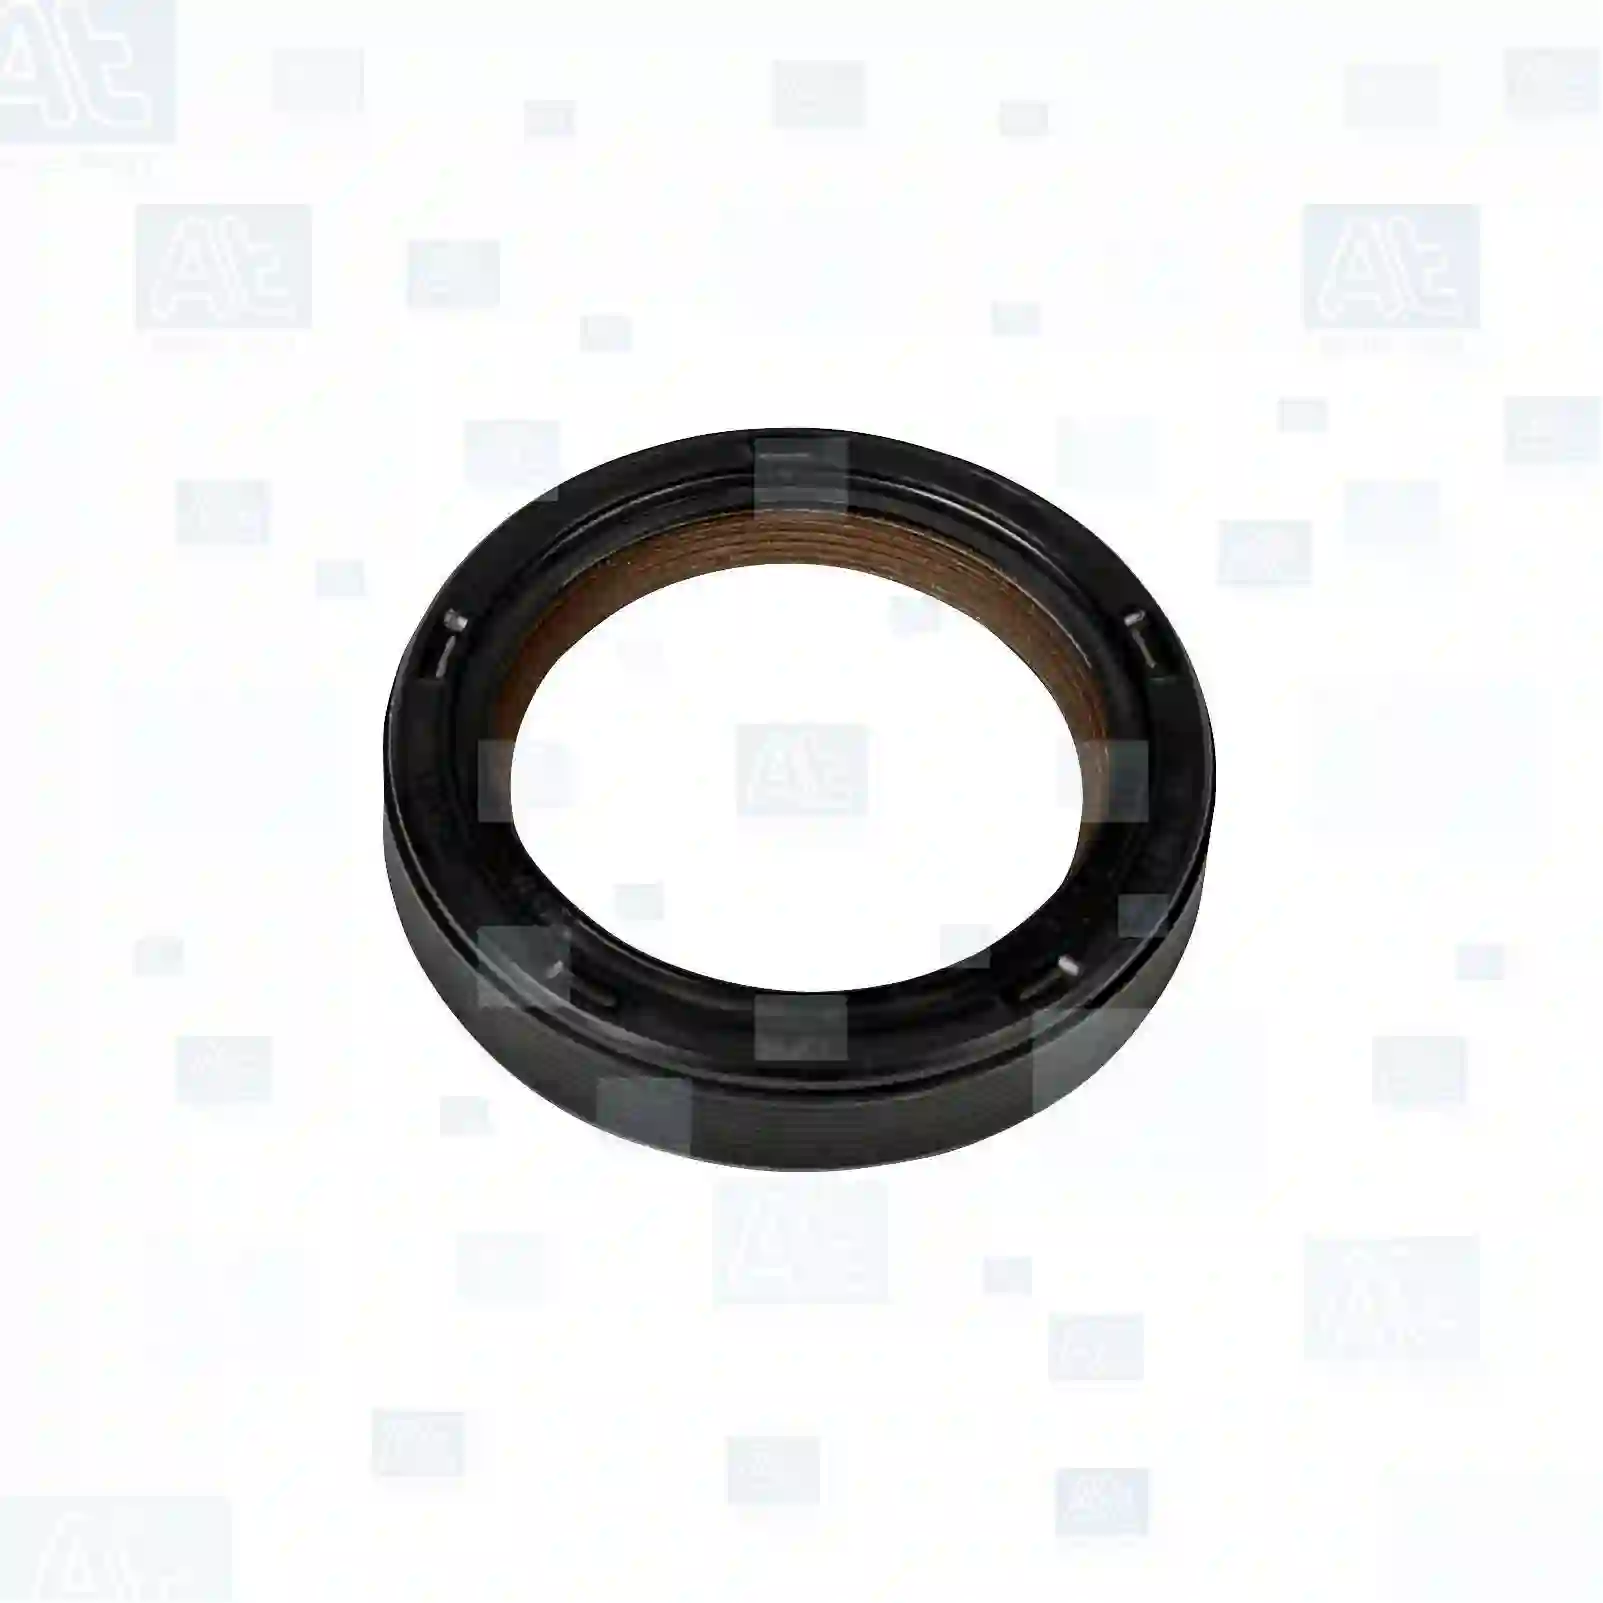 Oil seal, 77704054, 038103085, 038103085B, 038103085E, 03G103295D, 03G105021C, 03G105173, 03G198998F, 06D103151, 06D103151B, 1100691, 1215960, 2M21-6700-AA, MN980009, 95510108500, 038103085, 038103085E, 03D105171B, 038103085E, 038103151, 038103153A, 038103153B, 038103085, 038103085B, 038103085E, 038103151, 038103153A, 038103153B, 03D105171B, 03G103295D, 03G105021C, 03G105173, 03G198998F, 06D103151, 06D103151B, ZG02625-0008 ||  77704054 At Spare Part | Engine, Accelerator Pedal, Camshaft, Connecting Rod, Crankcase, Crankshaft, Cylinder Head, Engine Suspension Mountings, Exhaust Manifold, Exhaust Gas Recirculation, Filter Kits, Flywheel Housing, General Overhaul Kits, Engine, Intake Manifold, Oil Cleaner, Oil Cooler, Oil Filter, Oil Pump, Oil Sump, Piston & Liner, Sensor & Switch, Timing Case, Turbocharger, Cooling System, Belt Tensioner, Coolant Filter, Coolant Pipe, Corrosion Prevention Agent, Drive, Expansion Tank, Fan, Intercooler, Monitors & Gauges, Radiator, Thermostat, V-Belt / Timing belt, Water Pump, Fuel System, Electronical Injector Unit, Feed Pump, Fuel Filter, cpl., Fuel Gauge Sender,  Fuel Line, Fuel Pump, Fuel Tank, Injection Line Kit, Injection Pump, Exhaust System, Clutch & Pedal, Gearbox, Propeller Shaft, Axles, Brake System, Hubs & Wheels, Suspension, Leaf Spring, Universal Parts / Accessories, Steering, Electrical System, Cabin Oil seal, 77704054, 038103085, 038103085B, 038103085E, 03G103295D, 03G105021C, 03G105173, 03G198998F, 06D103151, 06D103151B, 1100691, 1215960, 2M21-6700-AA, MN980009, 95510108500, 038103085, 038103085E, 03D105171B, 038103085E, 038103151, 038103153A, 038103153B, 038103085, 038103085B, 038103085E, 038103151, 038103153A, 038103153B, 03D105171B, 03G103295D, 03G105021C, 03G105173, 03G198998F, 06D103151, 06D103151B, ZG02625-0008 ||  77704054 At Spare Part | Engine, Accelerator Pedal, Camshaft, Connecting Rod, Crankcase, Crankshaft, Cylinder Head, Engine Suspension Mountings, Exhaust Manifold, Exhaust Gas Recirculation, Filter Kits, Flywheel Housing, General Overhaul Kits, Engine, Intake Manifold, Oil Cleaner, Oil Cooler, Oil Filter, Oil Pump, Oil Sump, Piston & Liner, Sensor & Switch, Timing Case, Turbocharger, Cooling System, Belt Tensioner, Coolant Filter, Coolant Pipe, Corrosion Prevention Agent, Drive, Expansion Tank, Fan, Intercooler, Monitors & Gauges, Radiator, Thermostat, V-Belt / Timing belt, Water Pump, Fuel System, Electronical Injector Unit, Feed Pump, Fuel Filter, cpl., Fuel Gauge Sender,  Fuel Line, Fuel Pump, Fuel Tank, Injection Line Kit, Injection Pump, Exhaust System, Clutch & Pedal, Gearbox, Propeller Shaft, Axles, Brake System, Hubs & Wheels, Suspension, Leaf Spring, Universal Parts / Accessories, Steering, Electrical System, Cabin